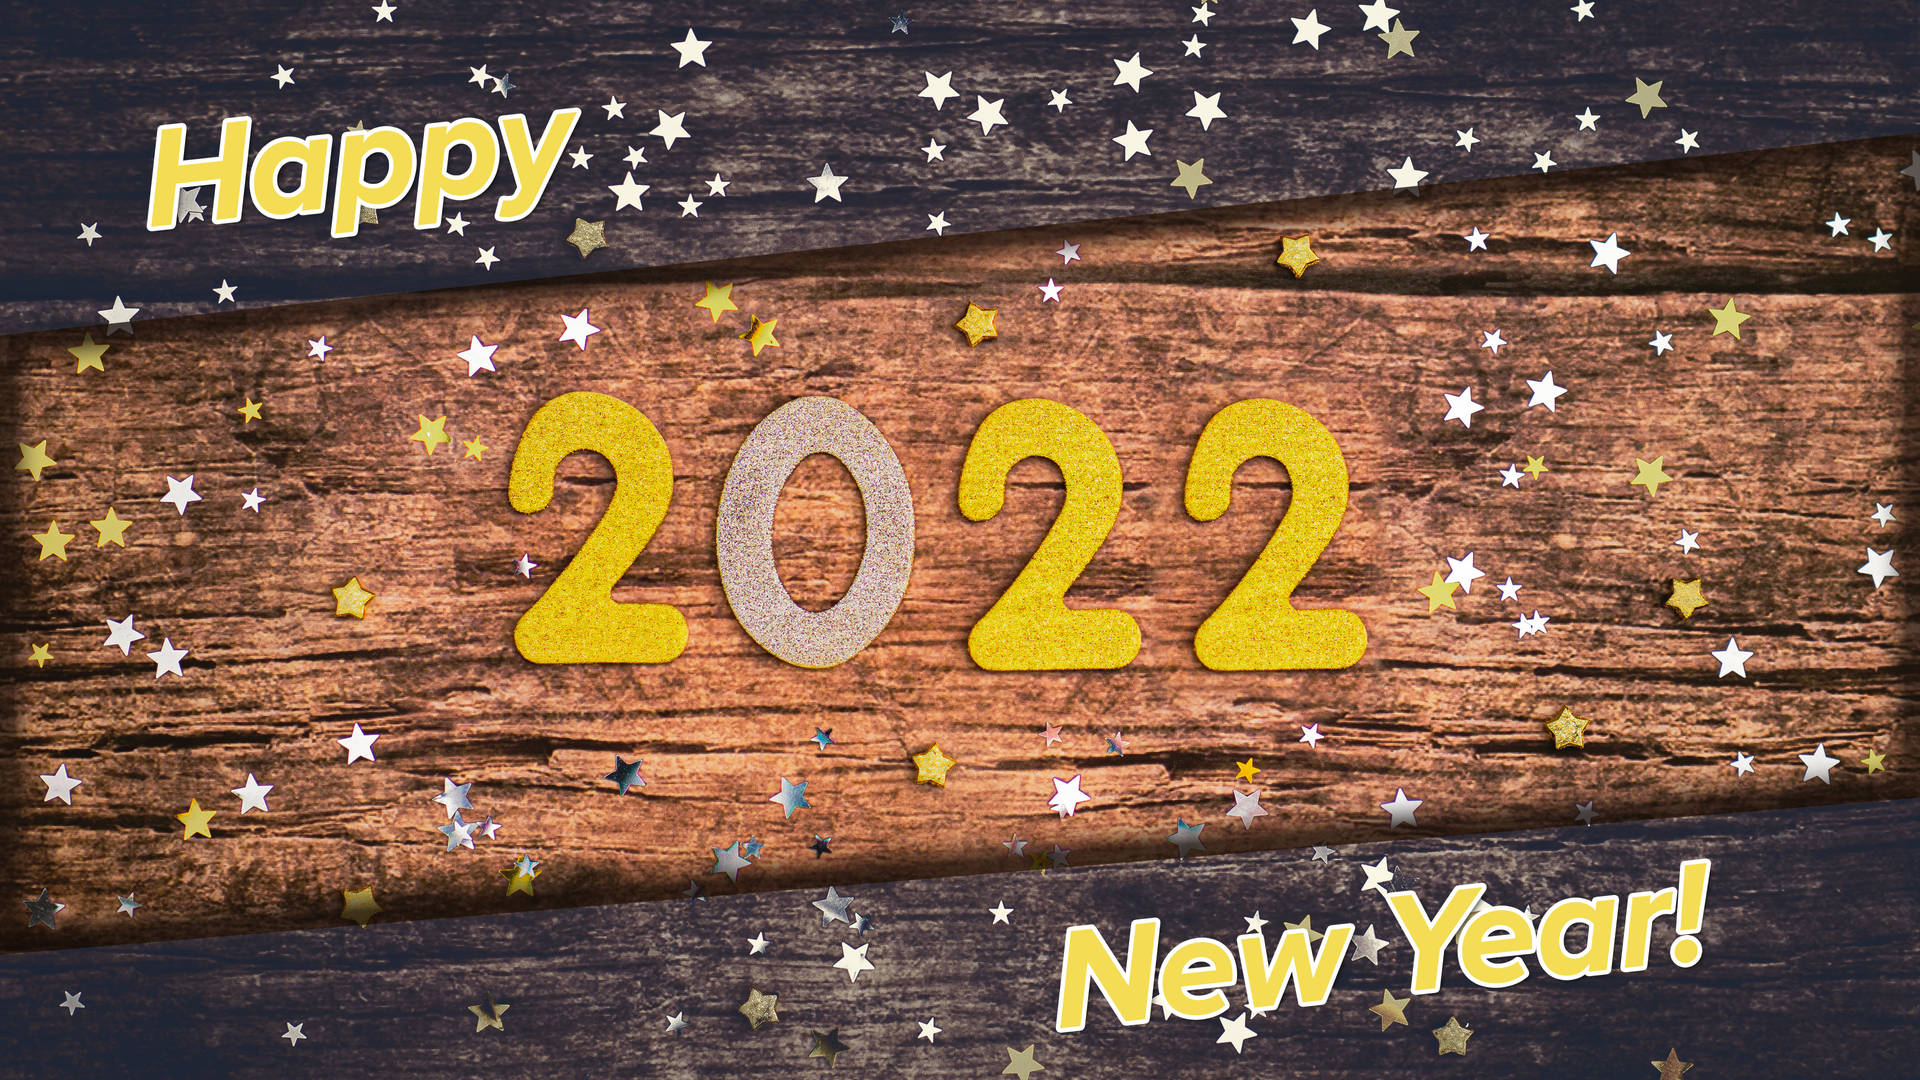 "welcoming New Year 2022 With Hope And Happiness" Wallpaper